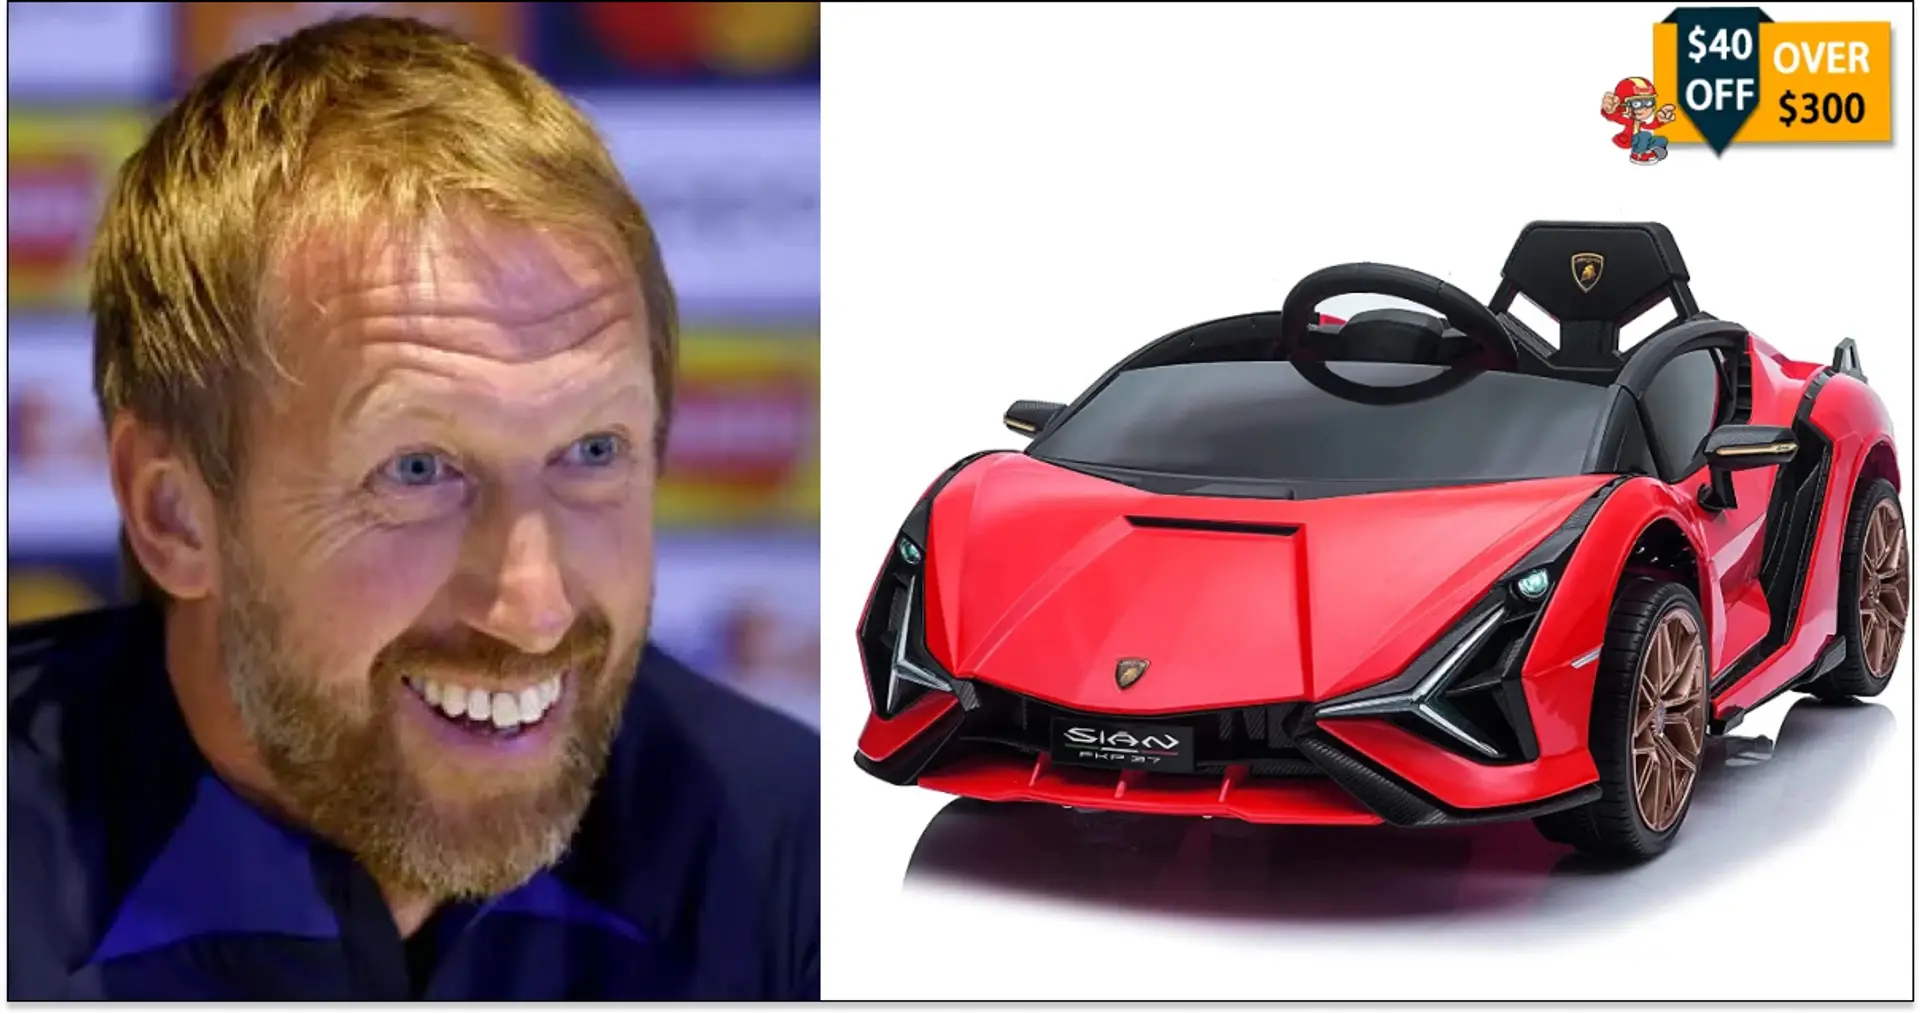 Chelsea gave Potter a 'toy Lamborghini' as a gift, here's why